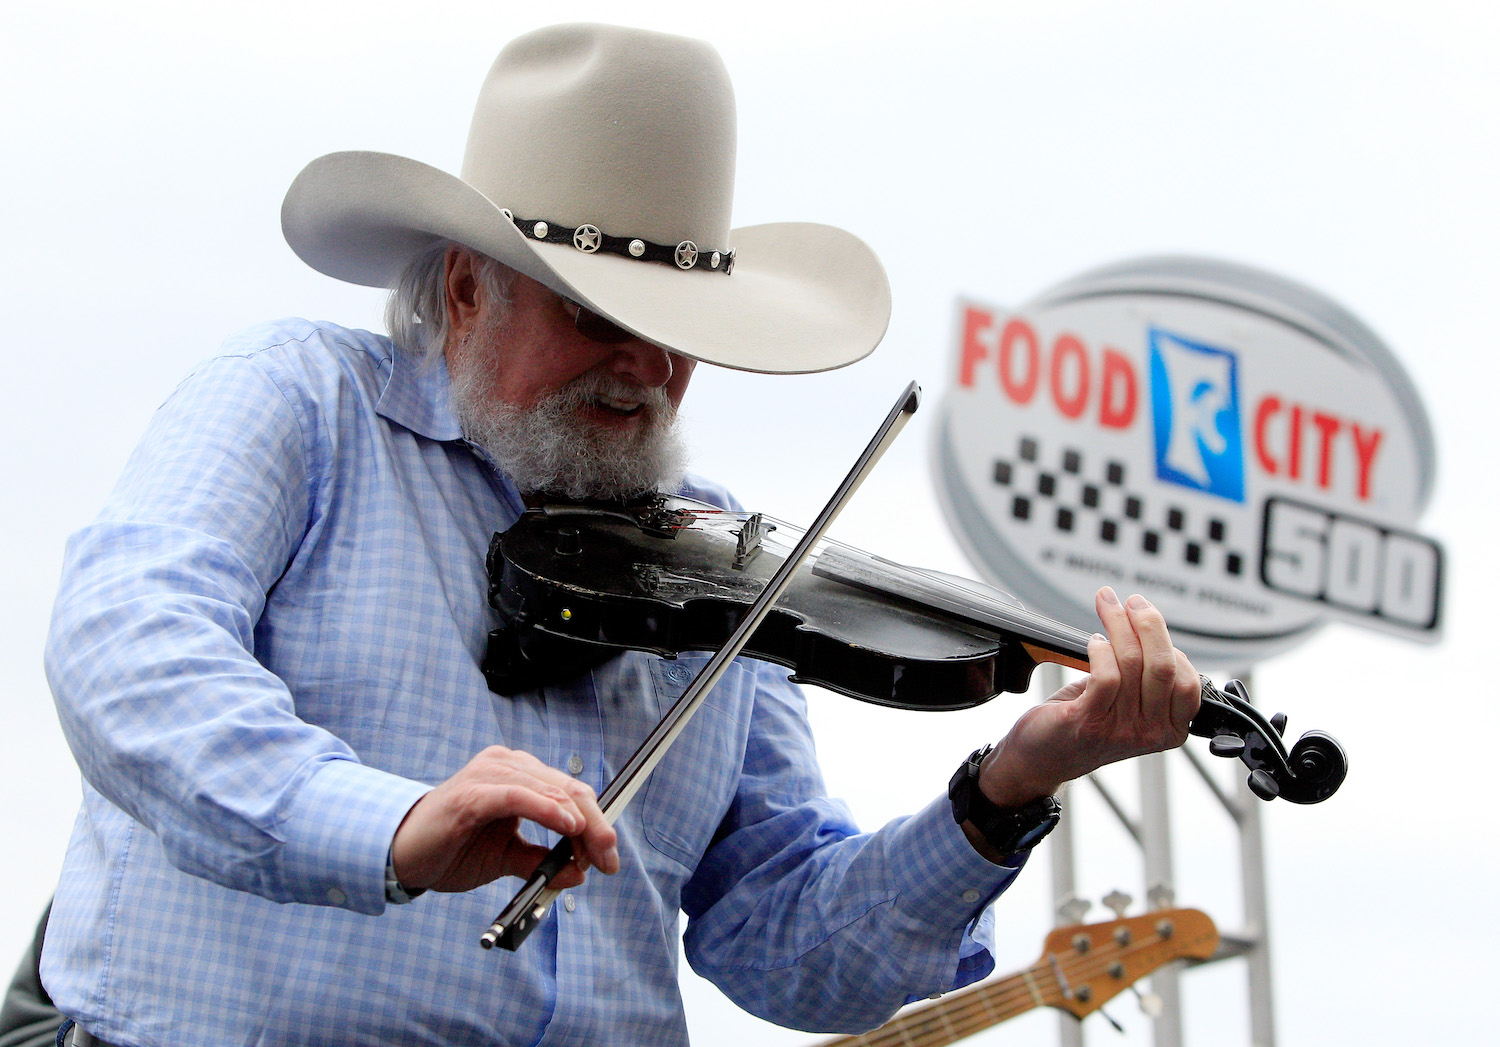 Charlie Daniels performs at NASCAR Event